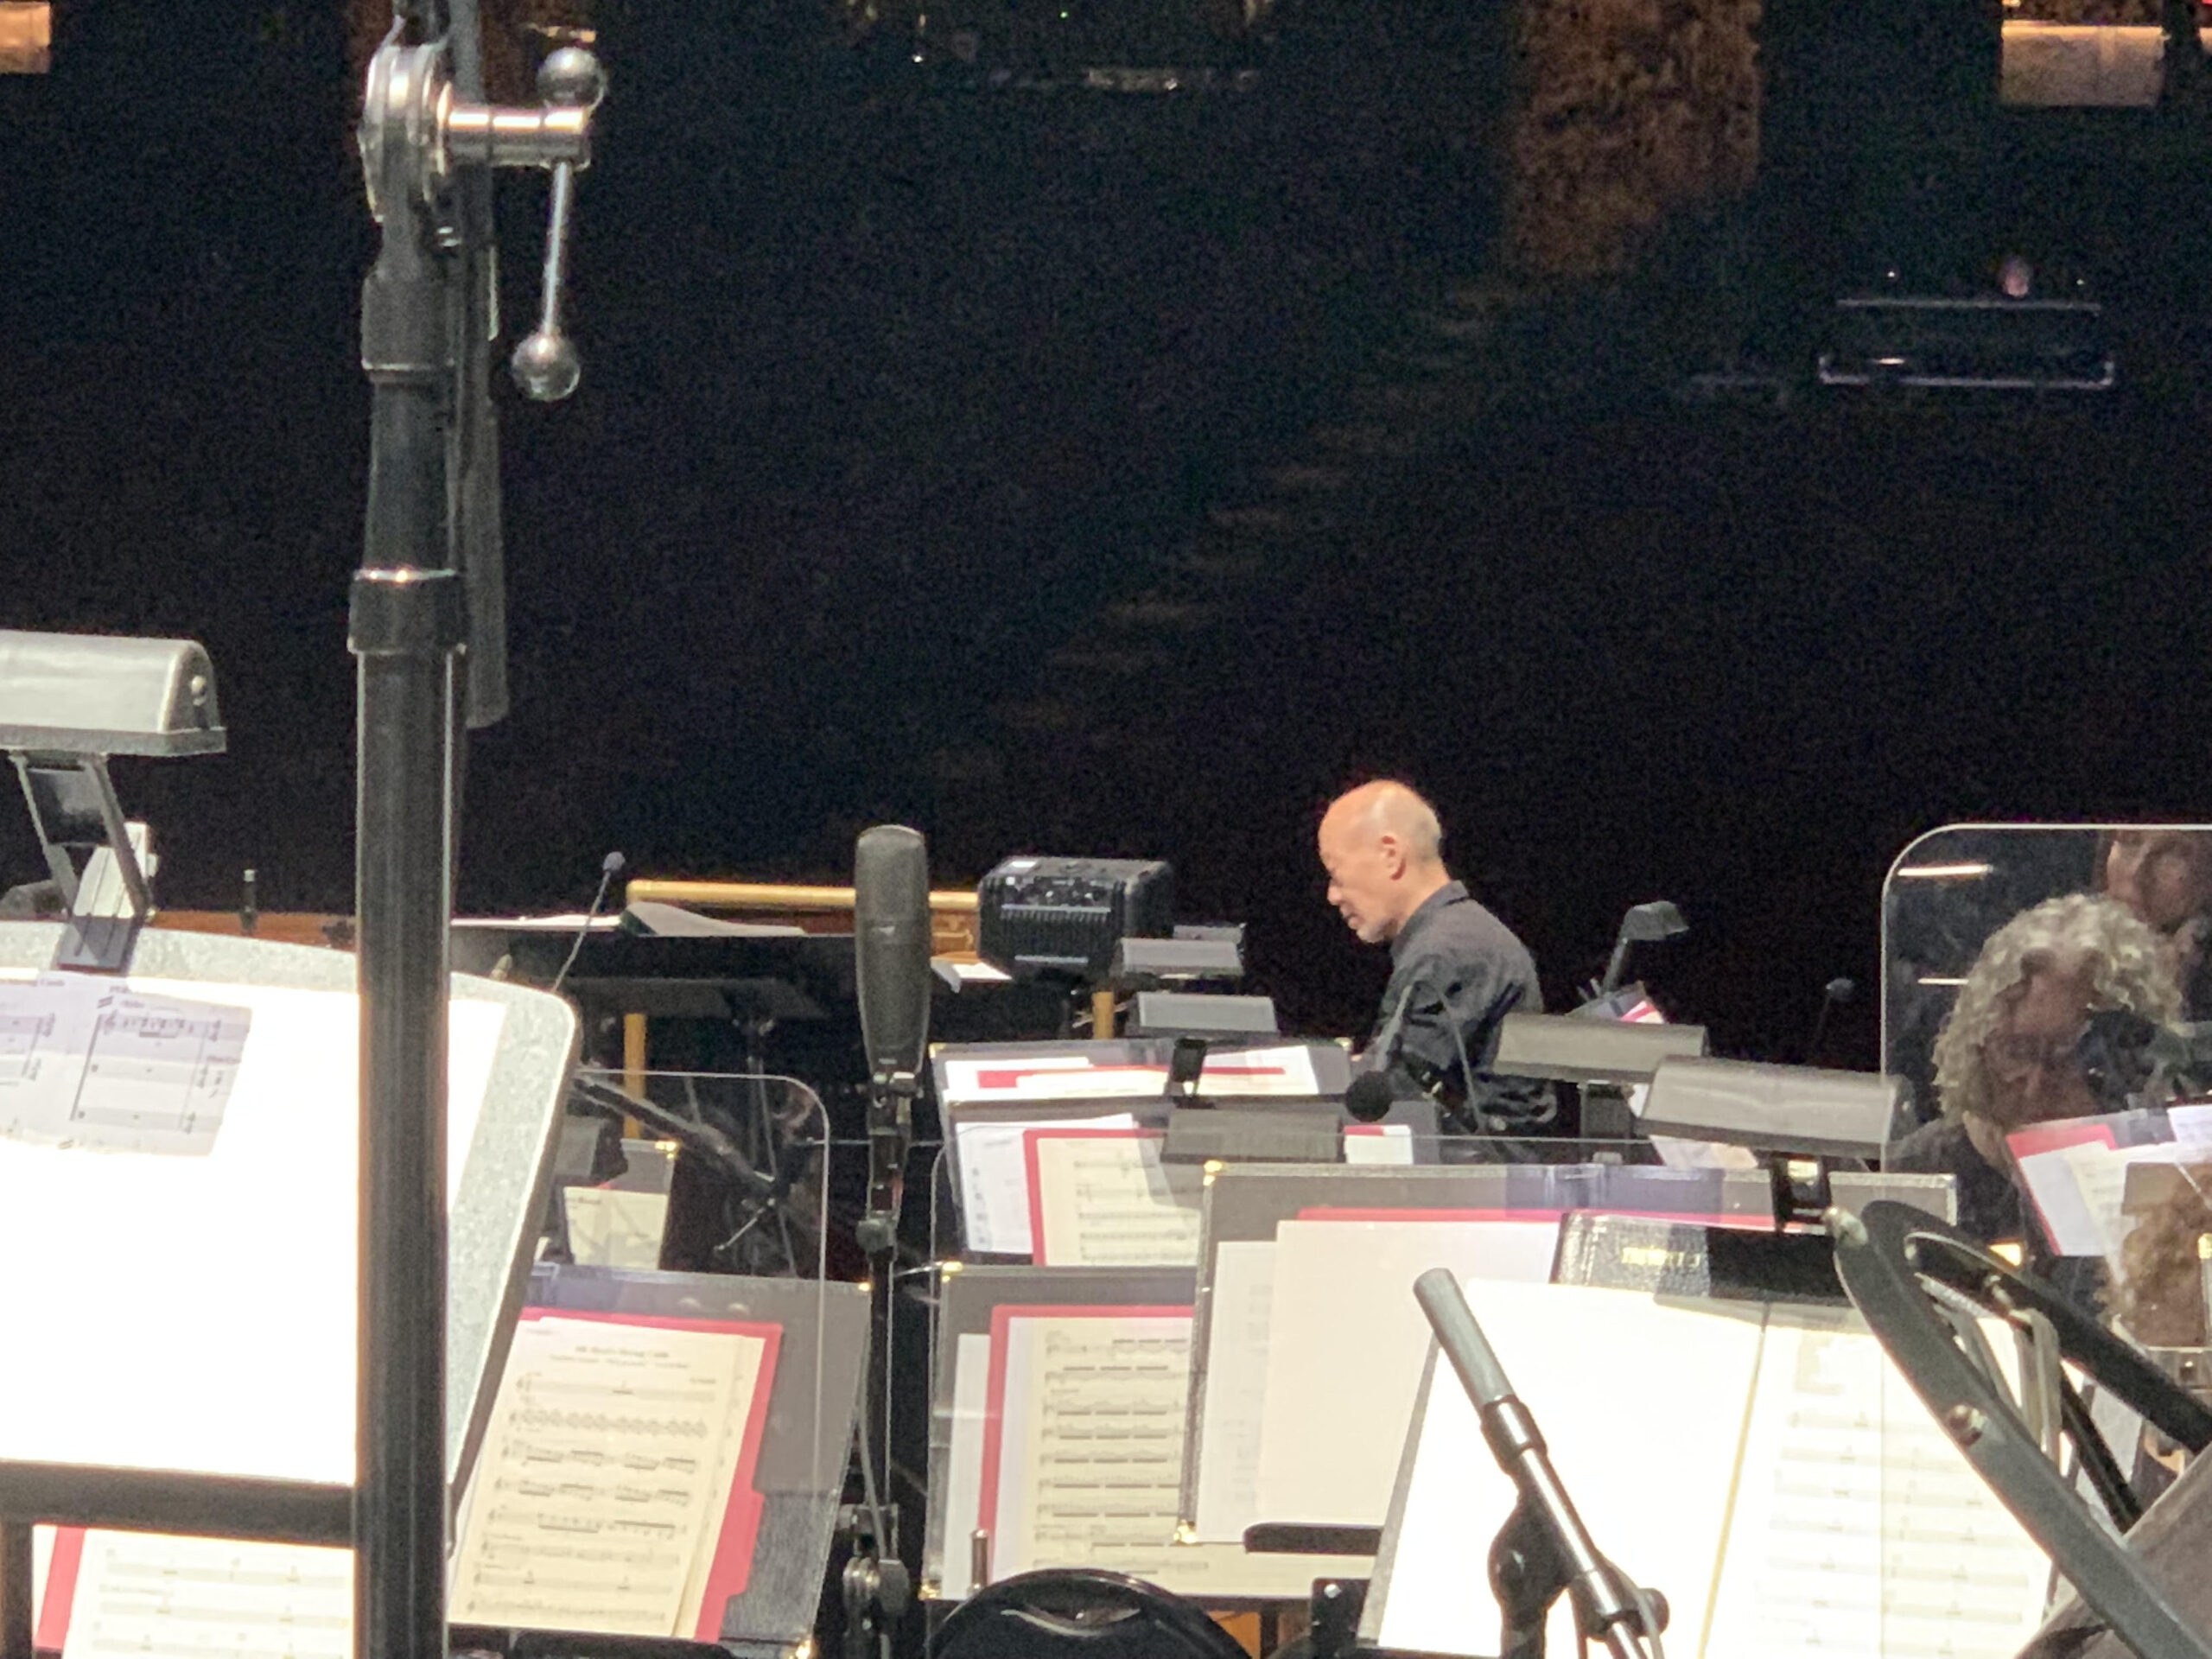 Joe Hisaishi, a 71 year old Japanese man, plays piano on stage